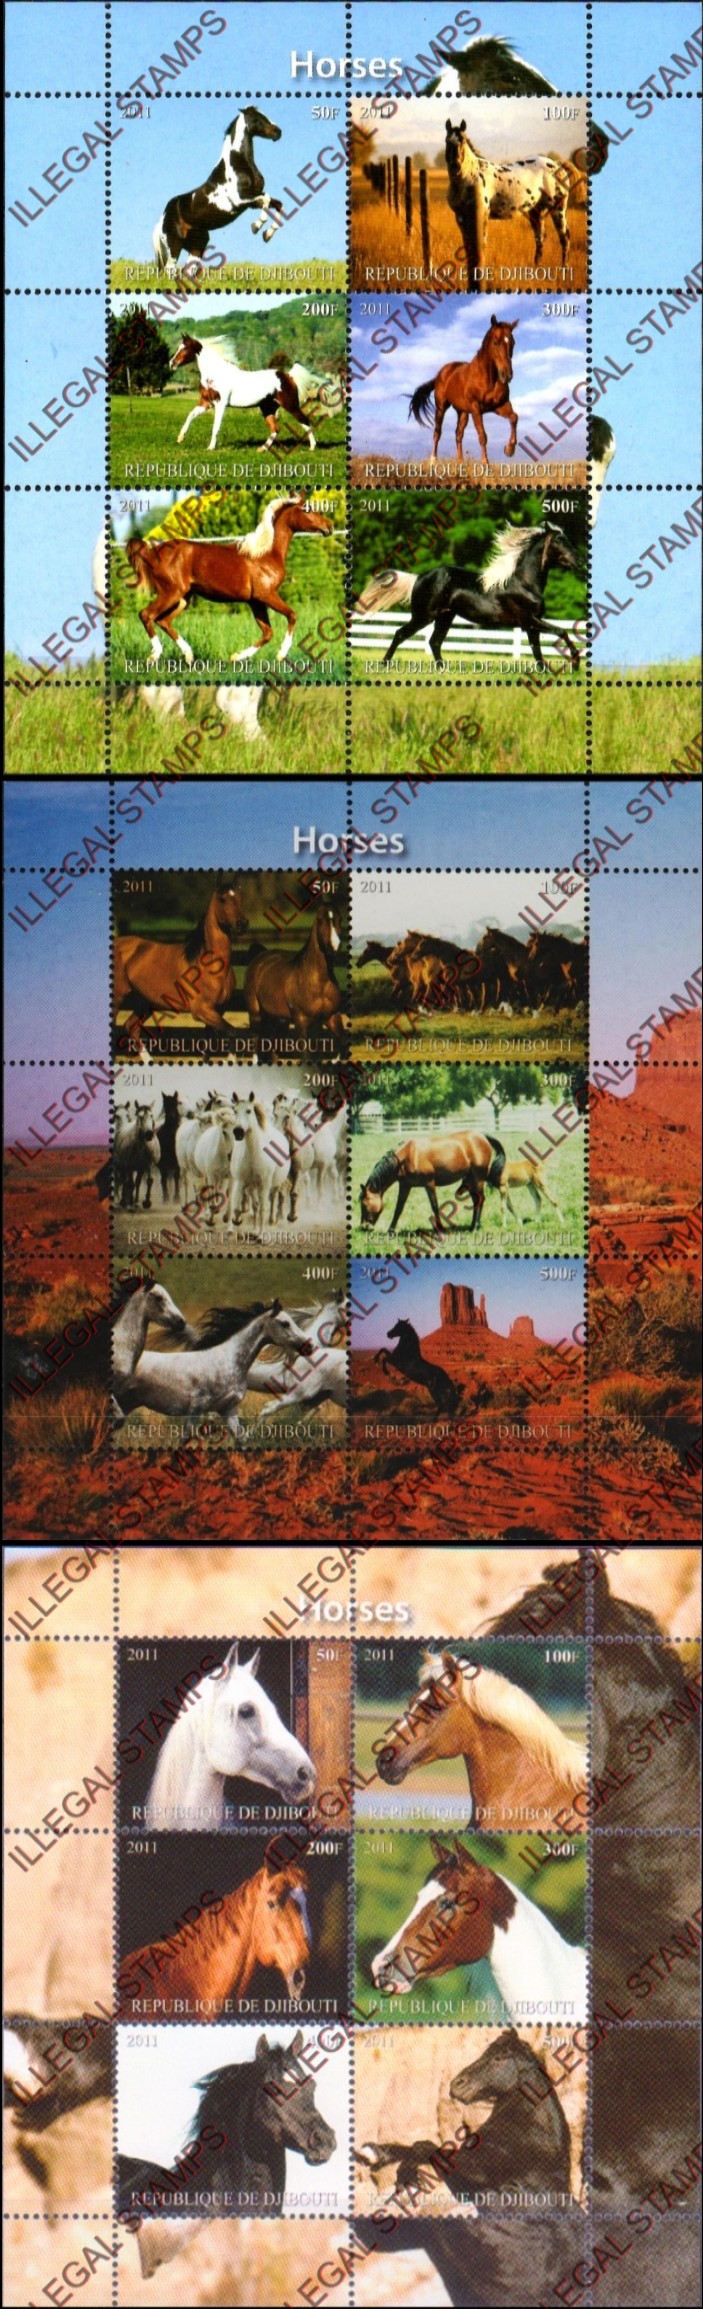 Djibouti 2011 Horses Illegal Stamp Sheetlets of 6 (Part 1)